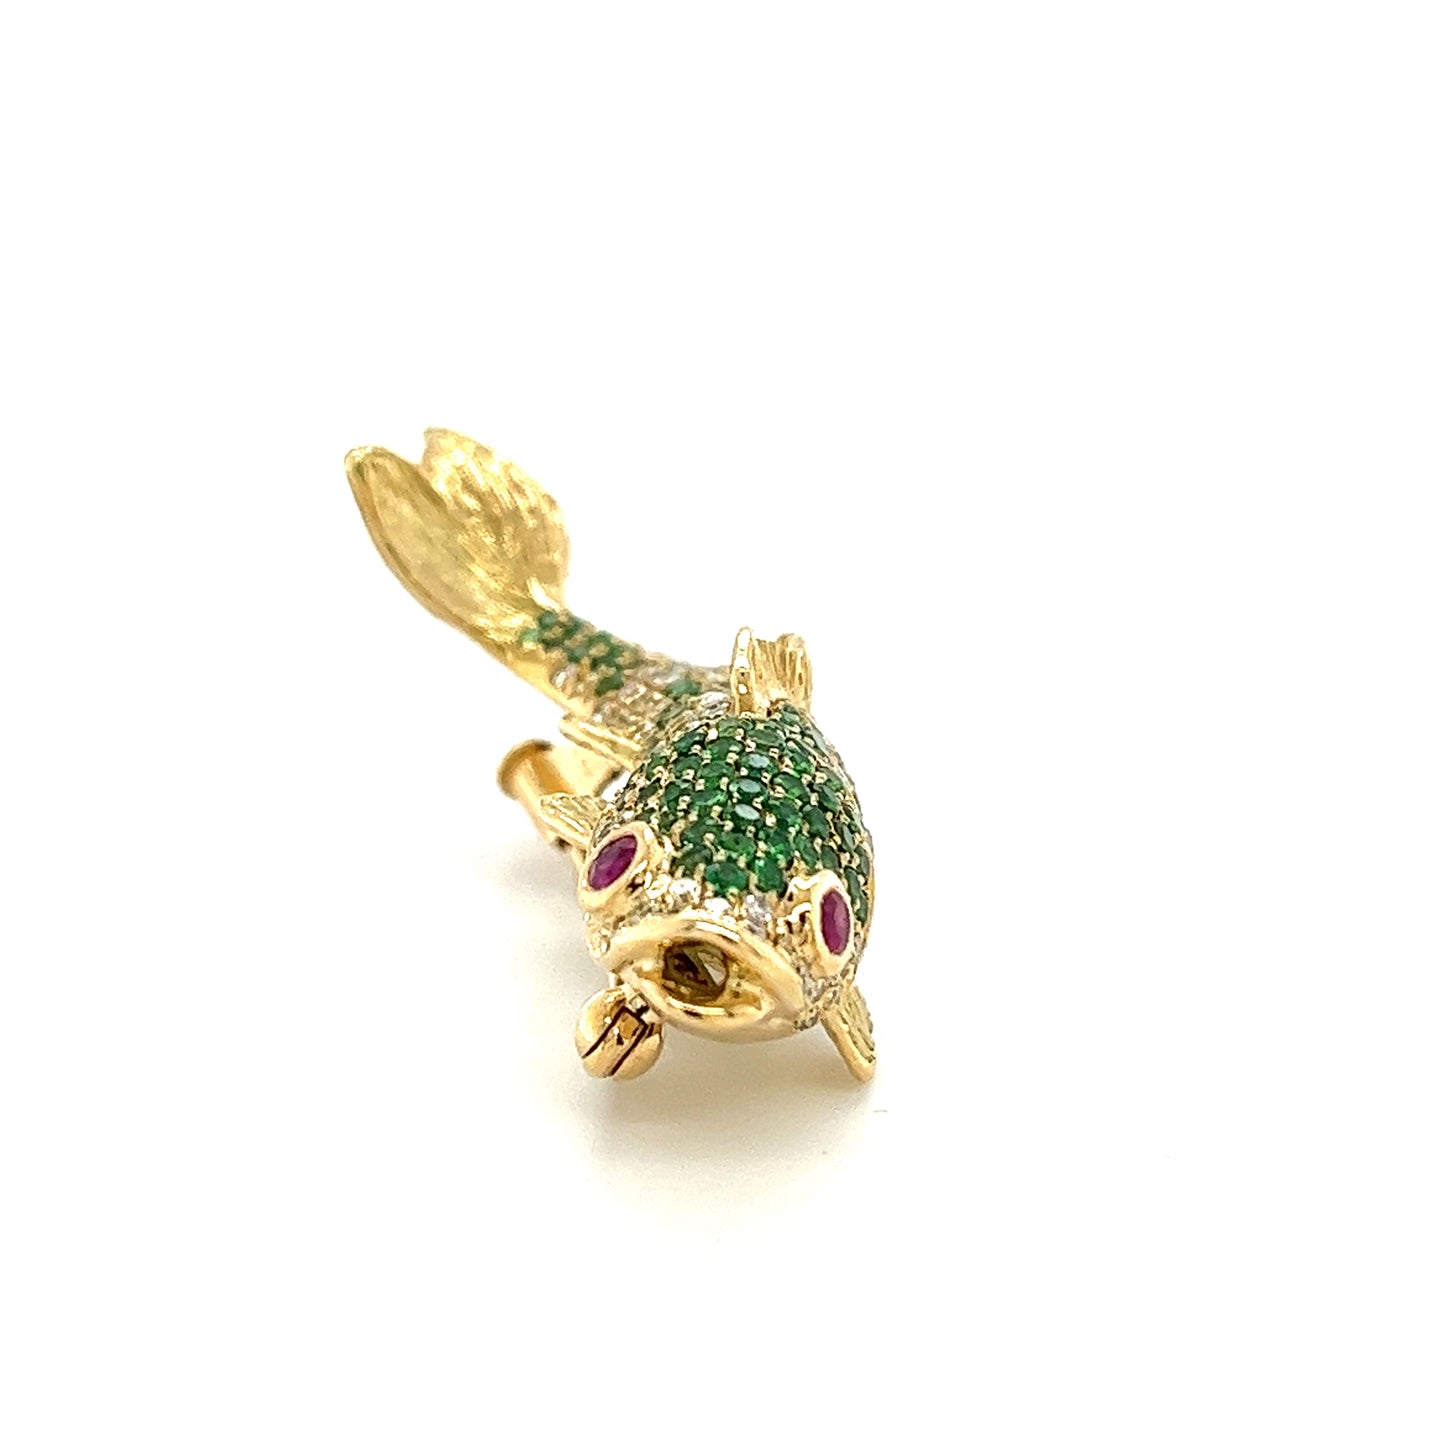 18K Gold Fish Brooch with Diamonds Green Garnets and Rubies